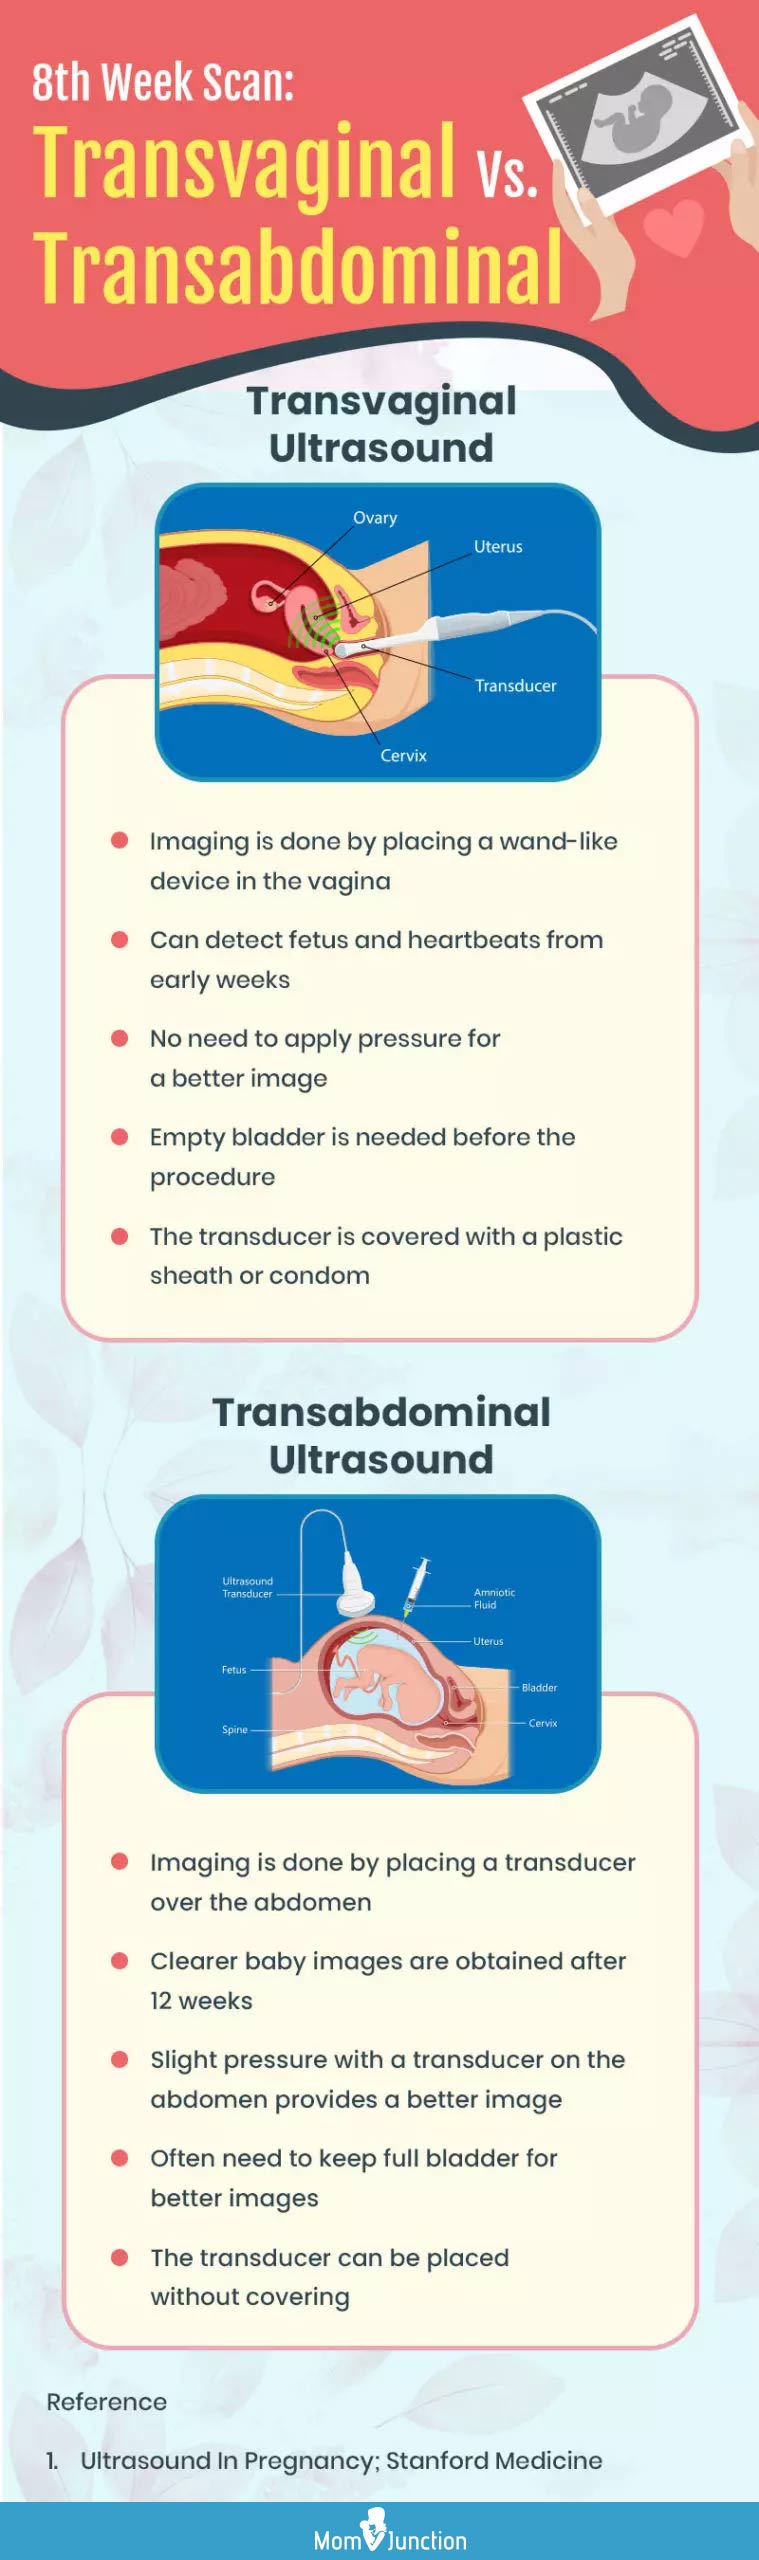 transvaginal or transabdominal ultrasound in 8th week (infographic)